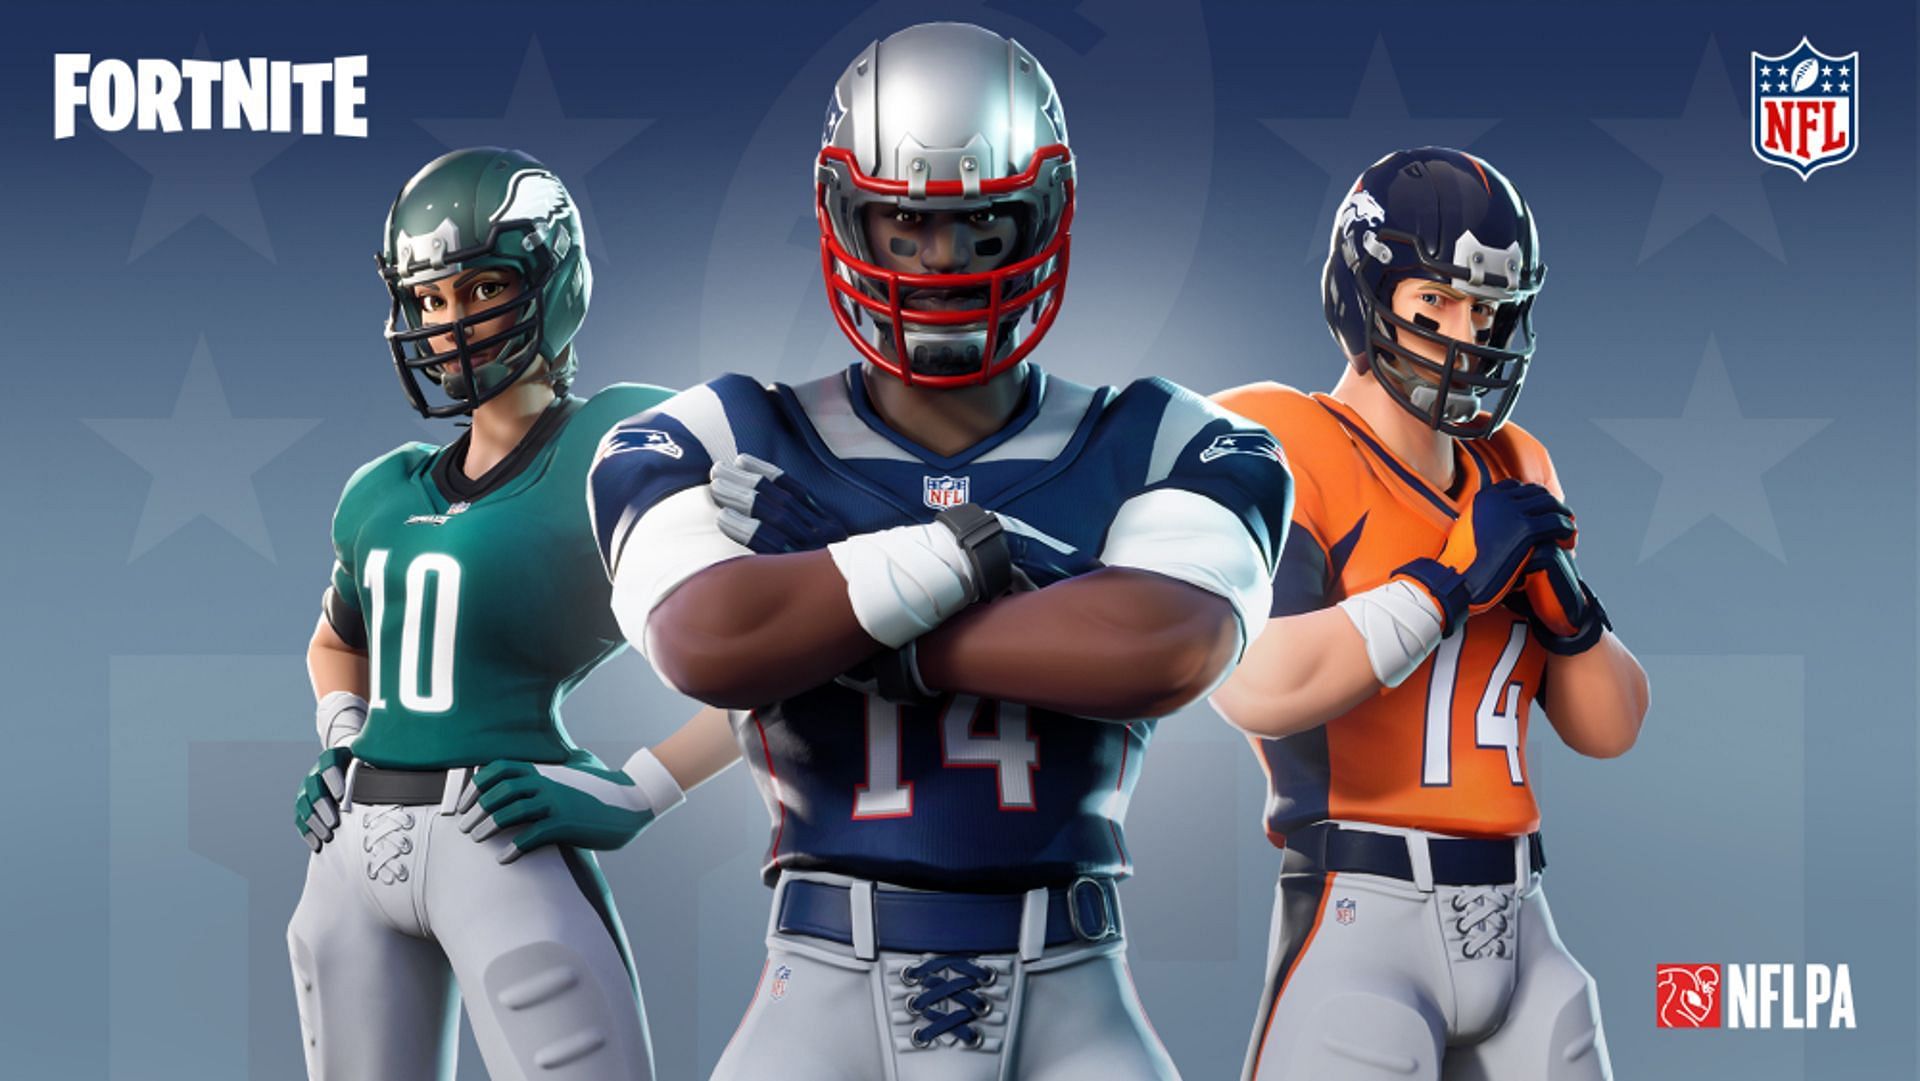 The NFL skins have been missing for a long time in Fortnite. (Image via Epic Games)